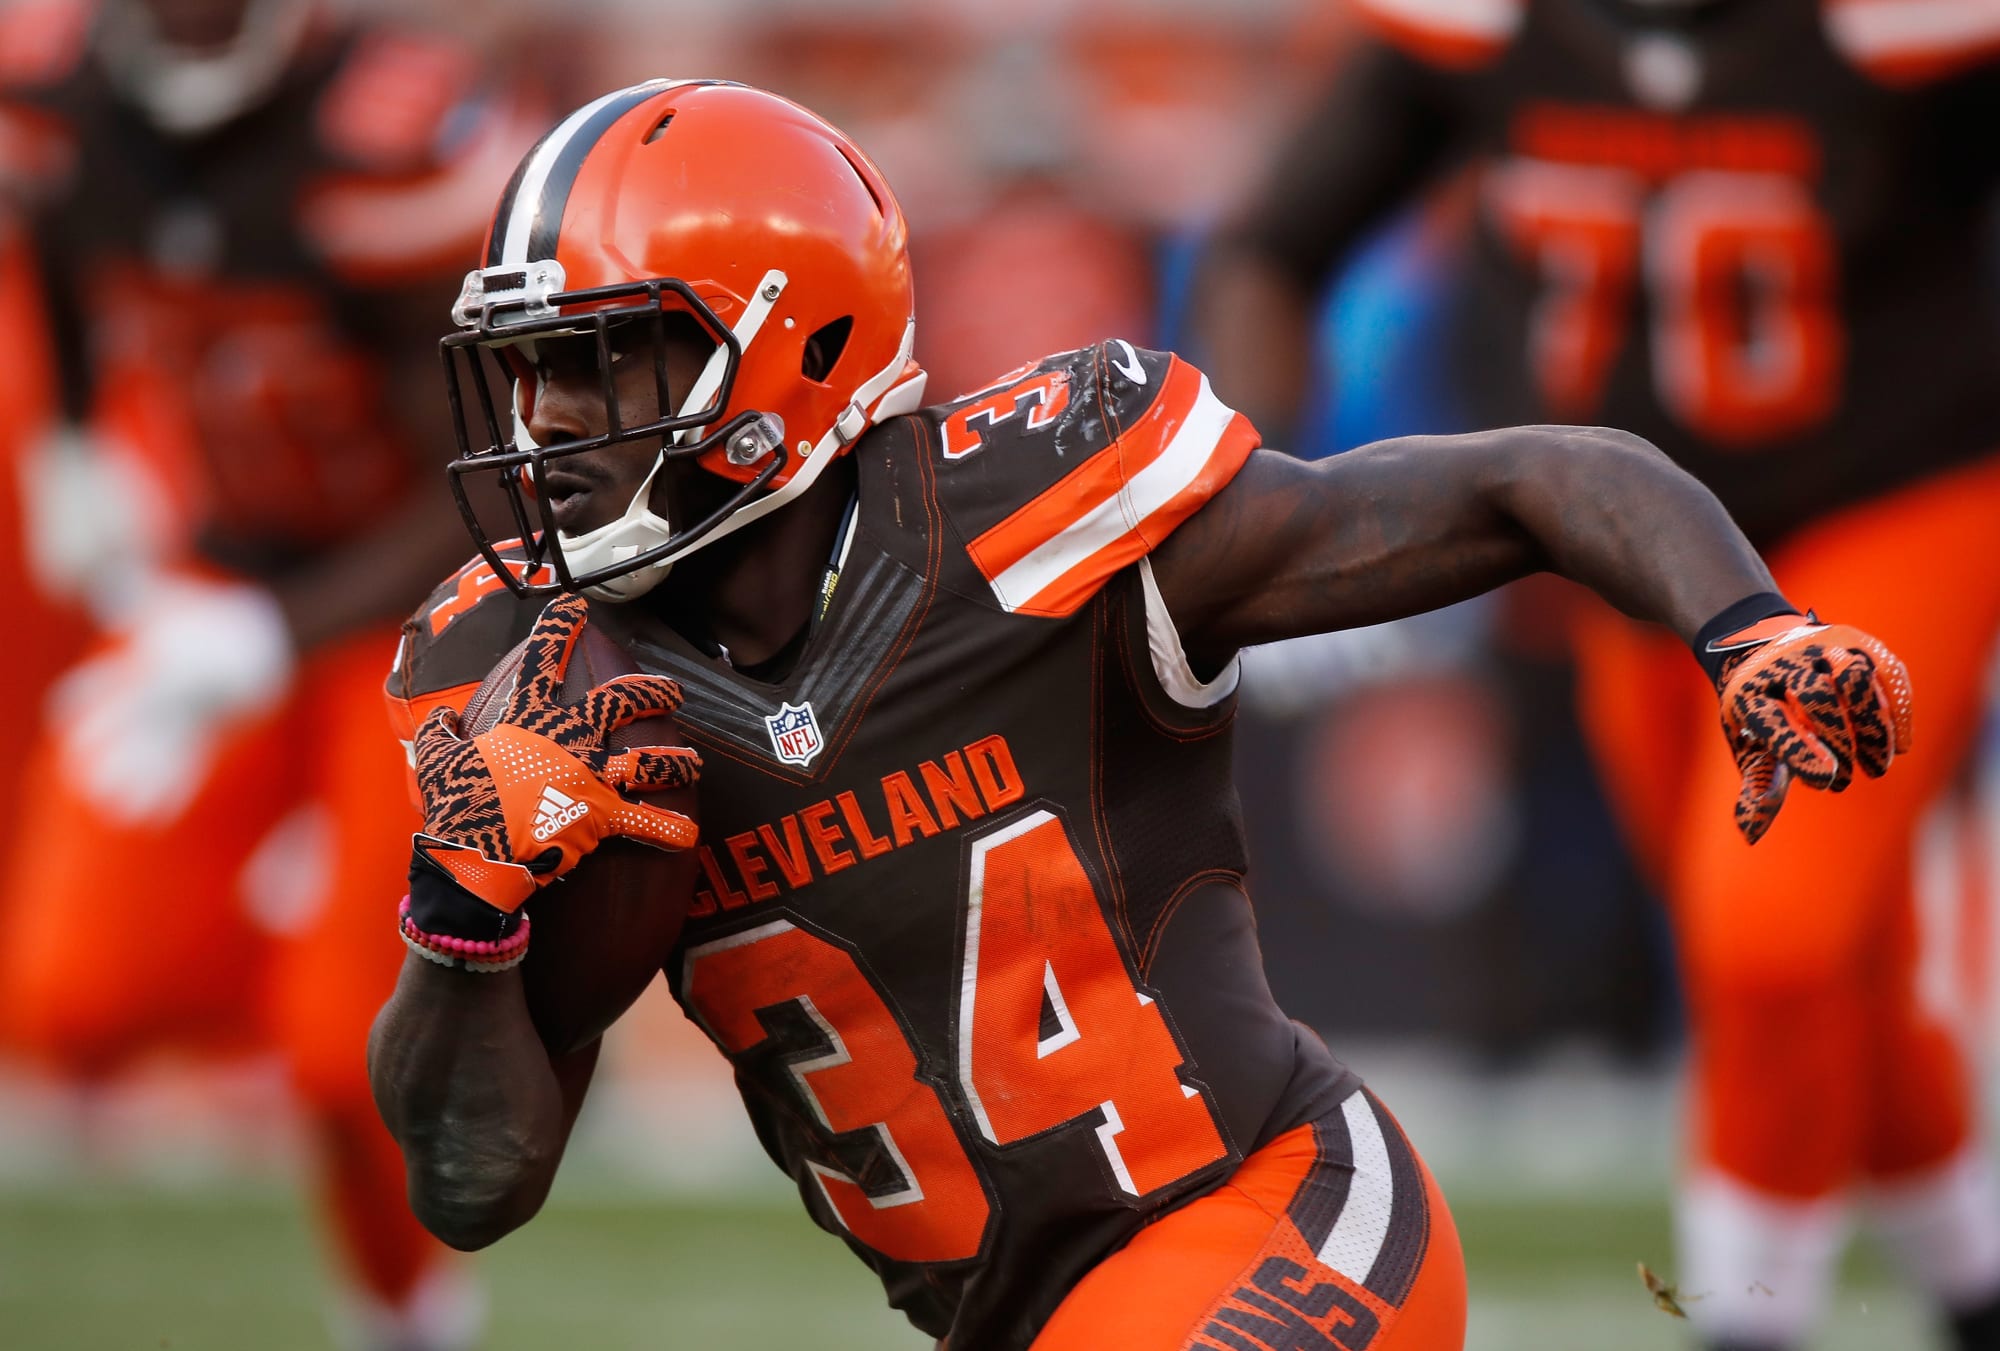 Cleveland Browns Running back preview, projection